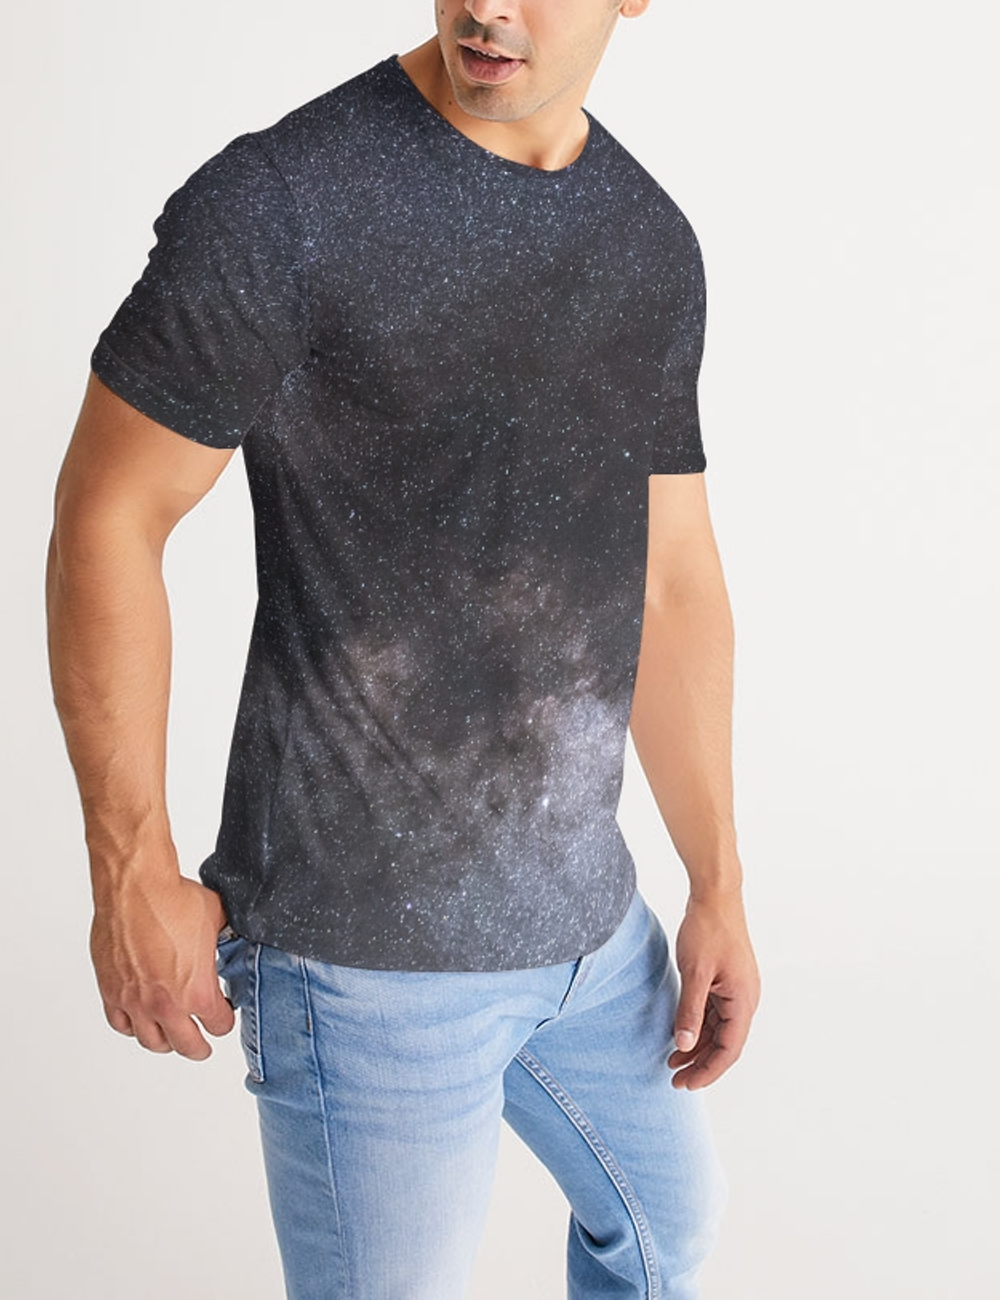 The Great Constellation | Men's Sublimated T-Shirt OniTakai